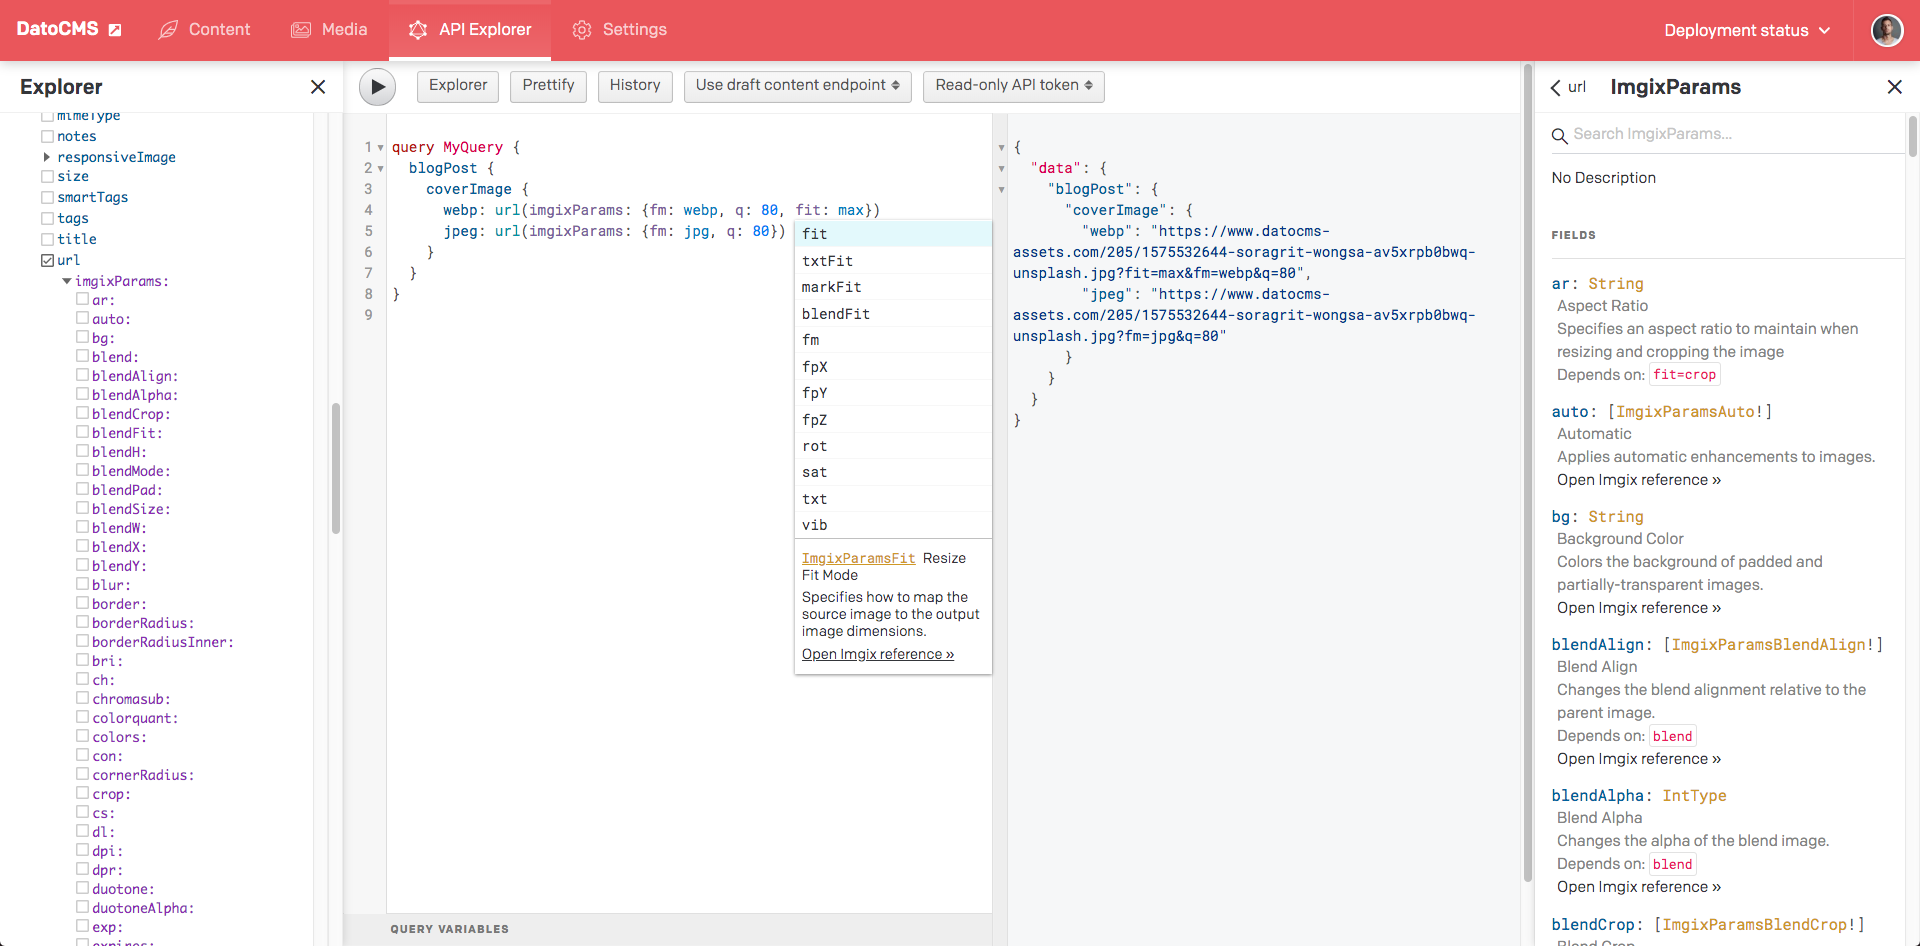 DatoCMS GraphQL query explorer helps you see all the different transformation from the get-go